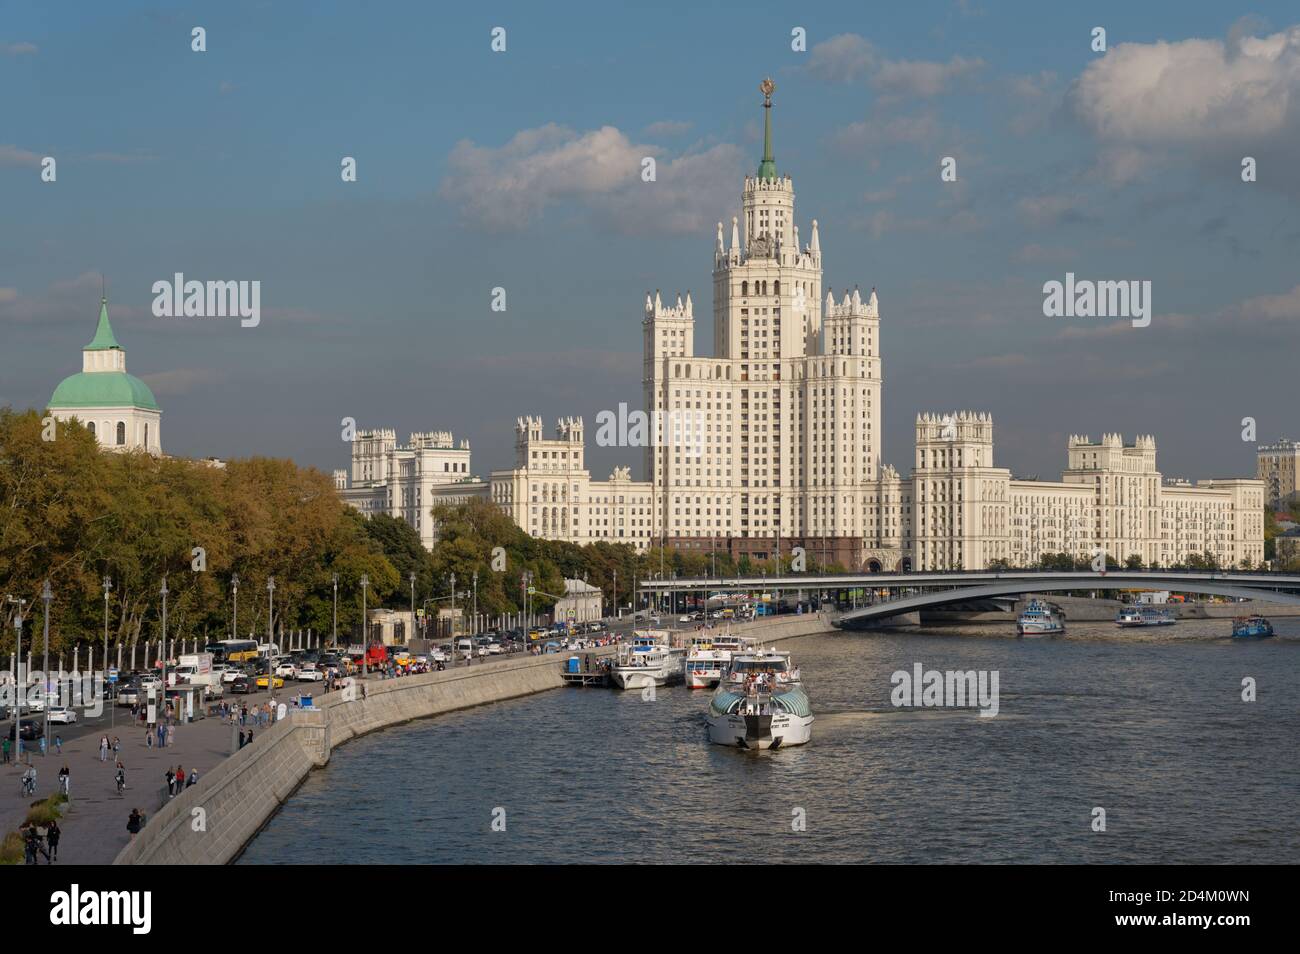 Stalin Empire Style landmark, one of famous Seven Sisters buildings, the skyscraper on Kotelnicheskaya embankment in Moscow, Russia Stock Photo